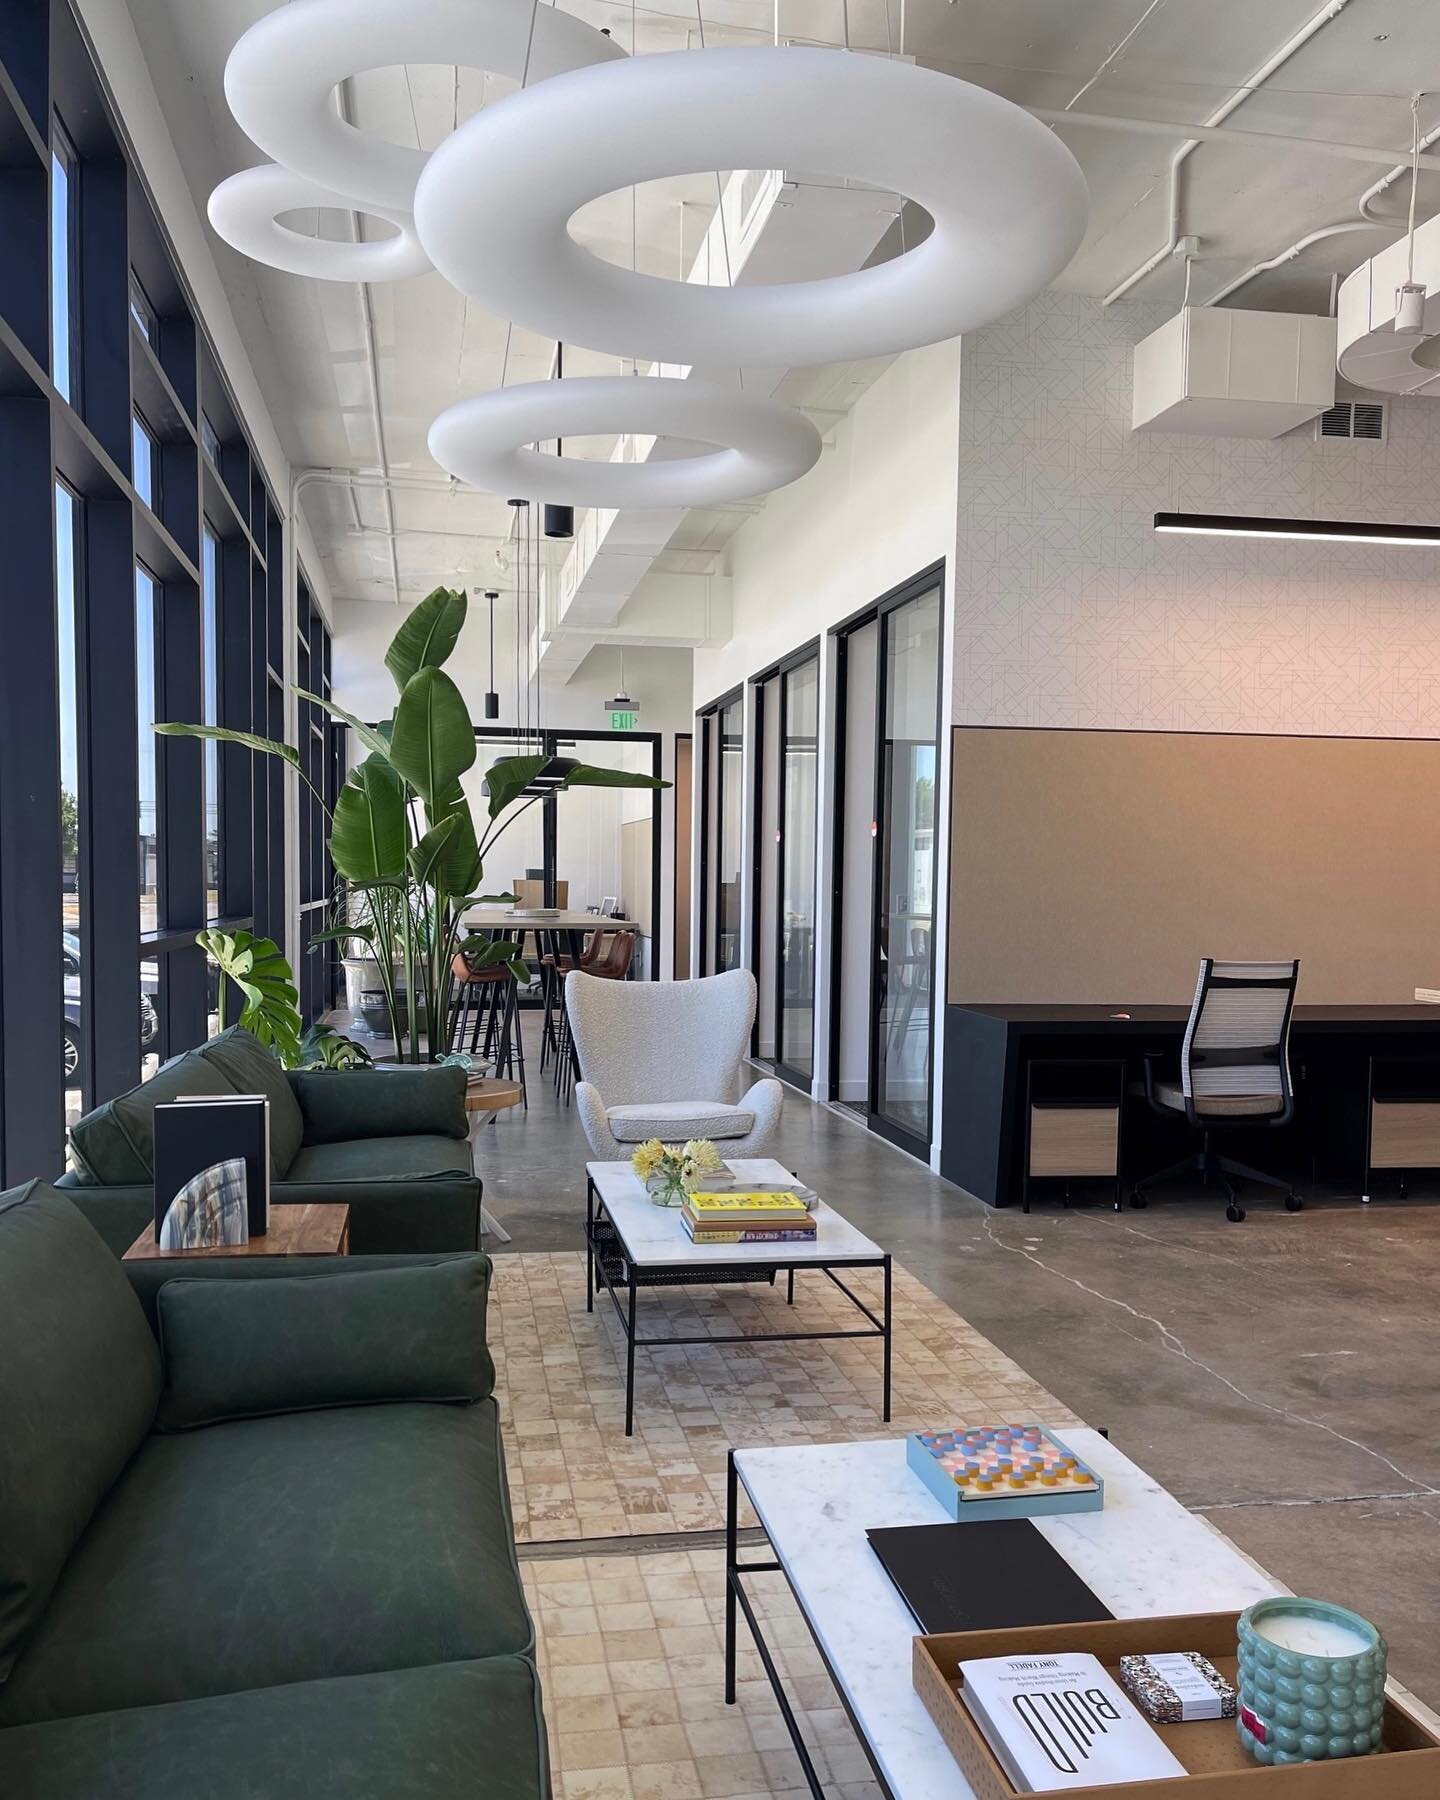 An office with a vibe. Loved designing and styling this space for @lancartecommercial 
Studies show that offices with natural light and biophilic elements make people happier AND healthier!